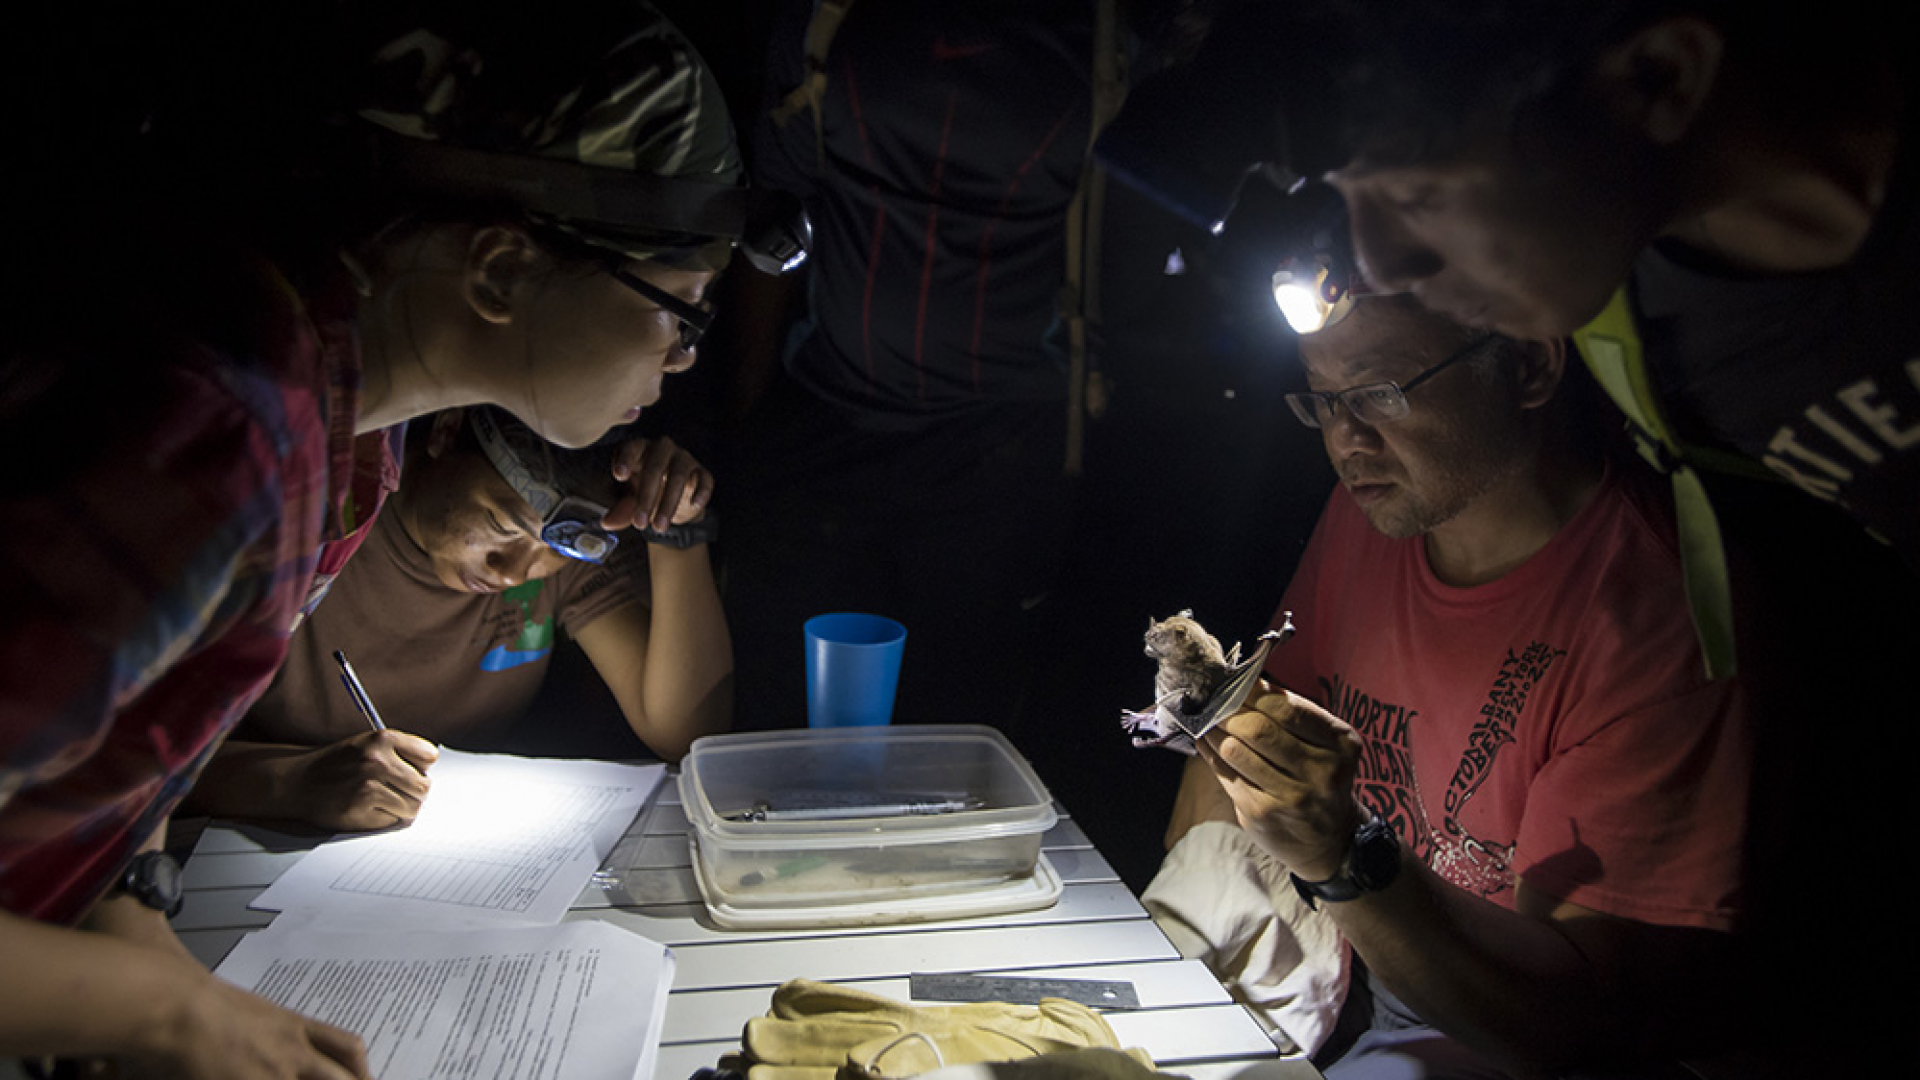 Dr Burton Lim and researchers examine a live bat in the field.